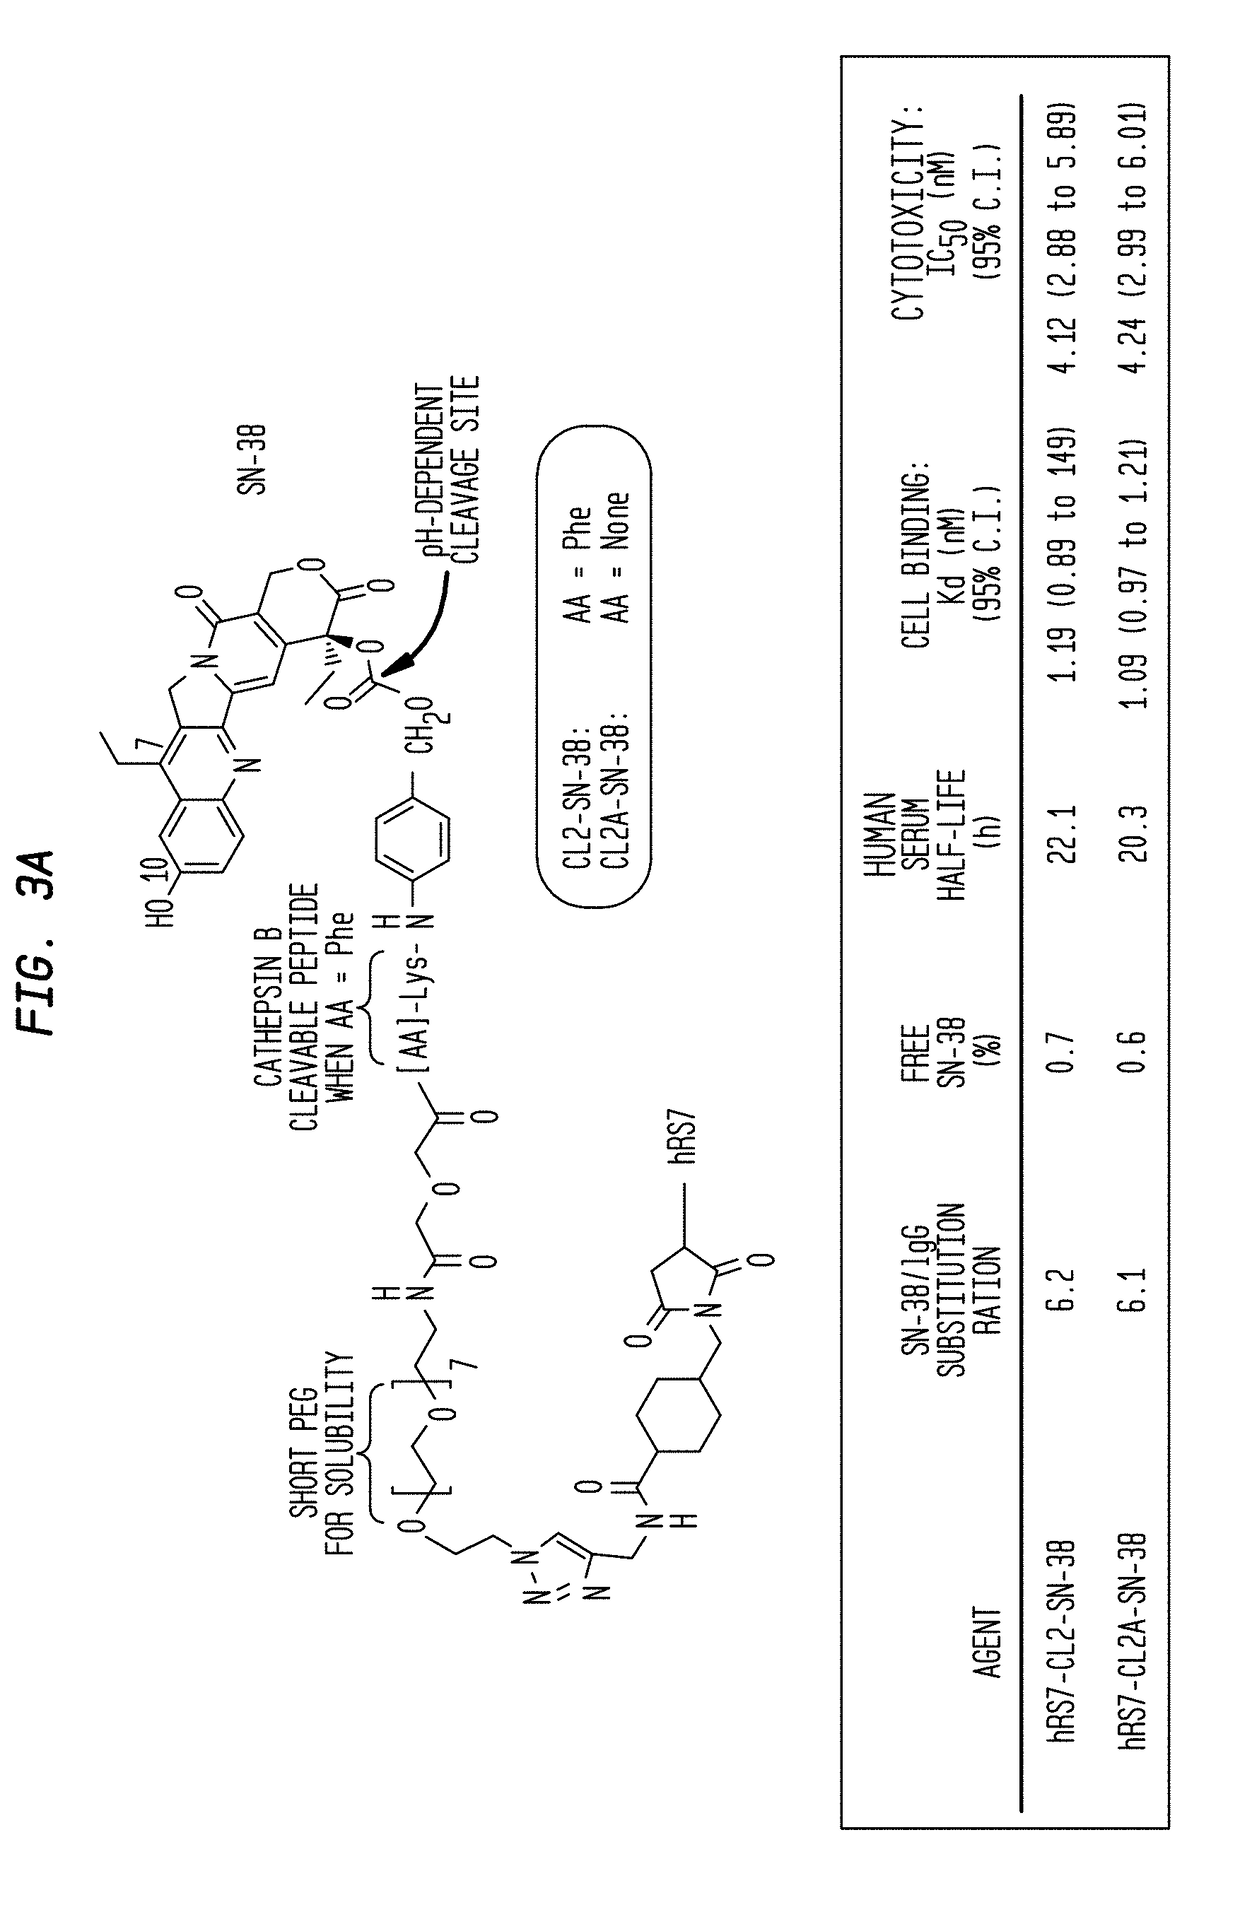 Subcutaneous administration of antibody-drug conjugates for cancer therapy